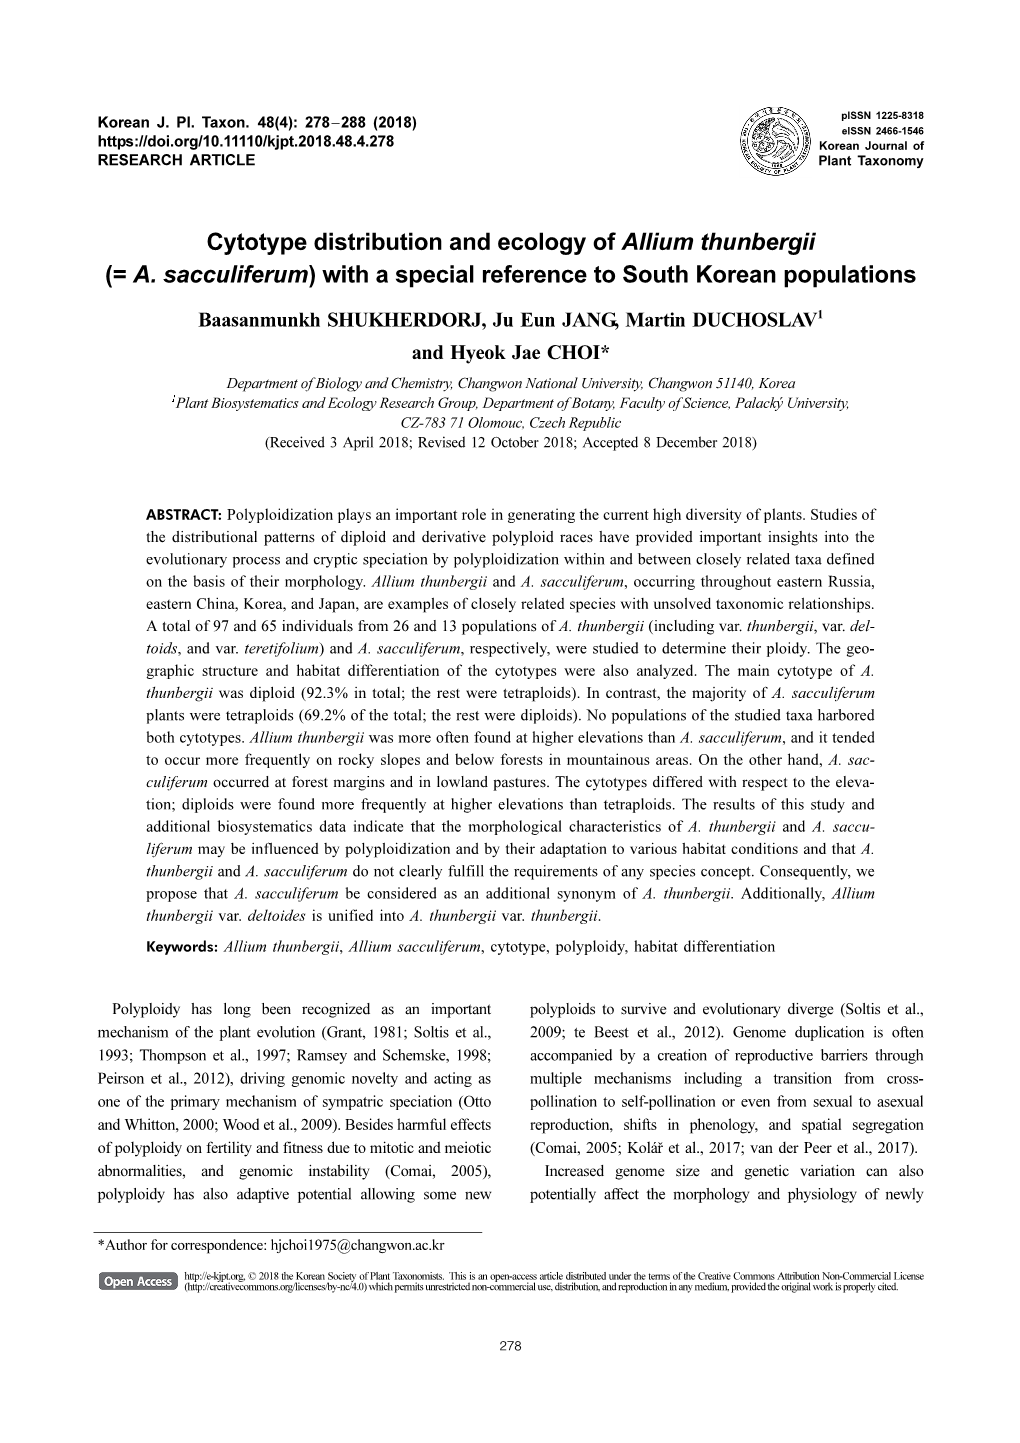 Cytotype Distribution and Ecology of Allium Thunbergii (= A